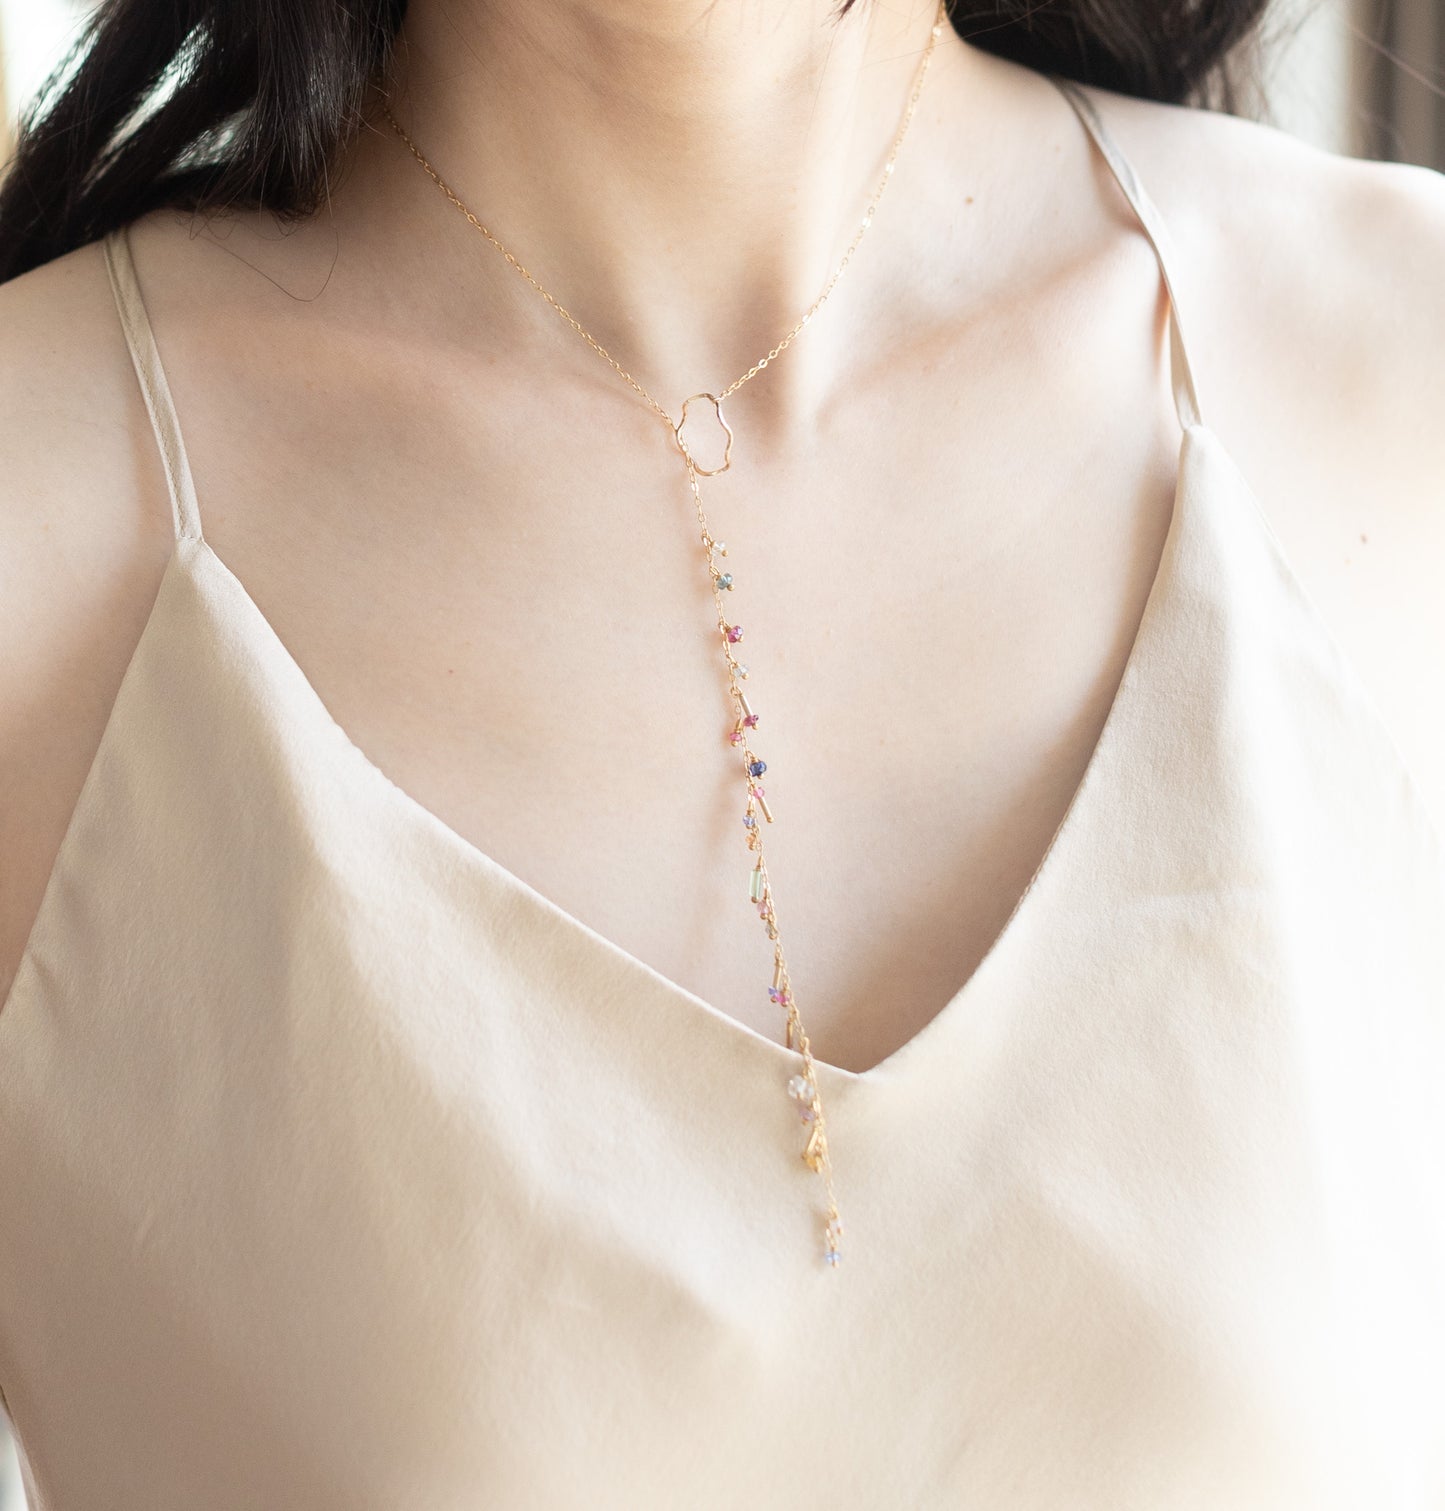 0086_Necklace